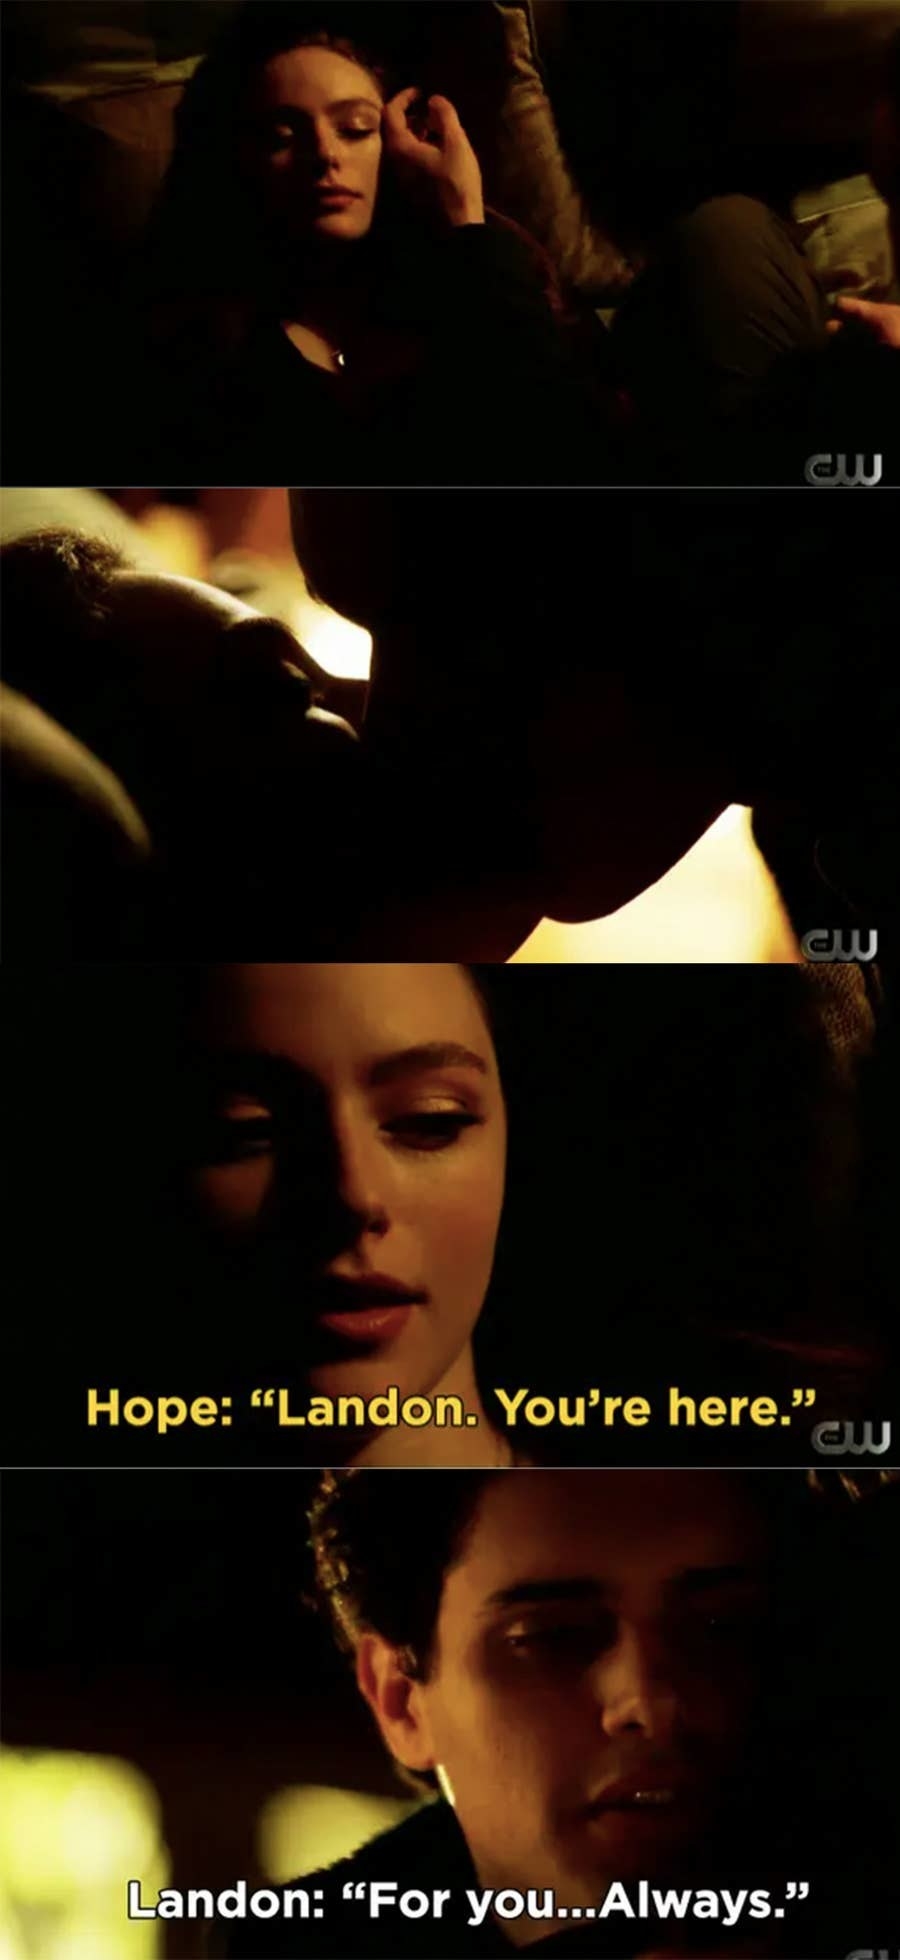 Landon kisses Hope and wakes her up from coma, &quot;Landon you&#x27;re here,&quot; &quot;For you, always&quot;